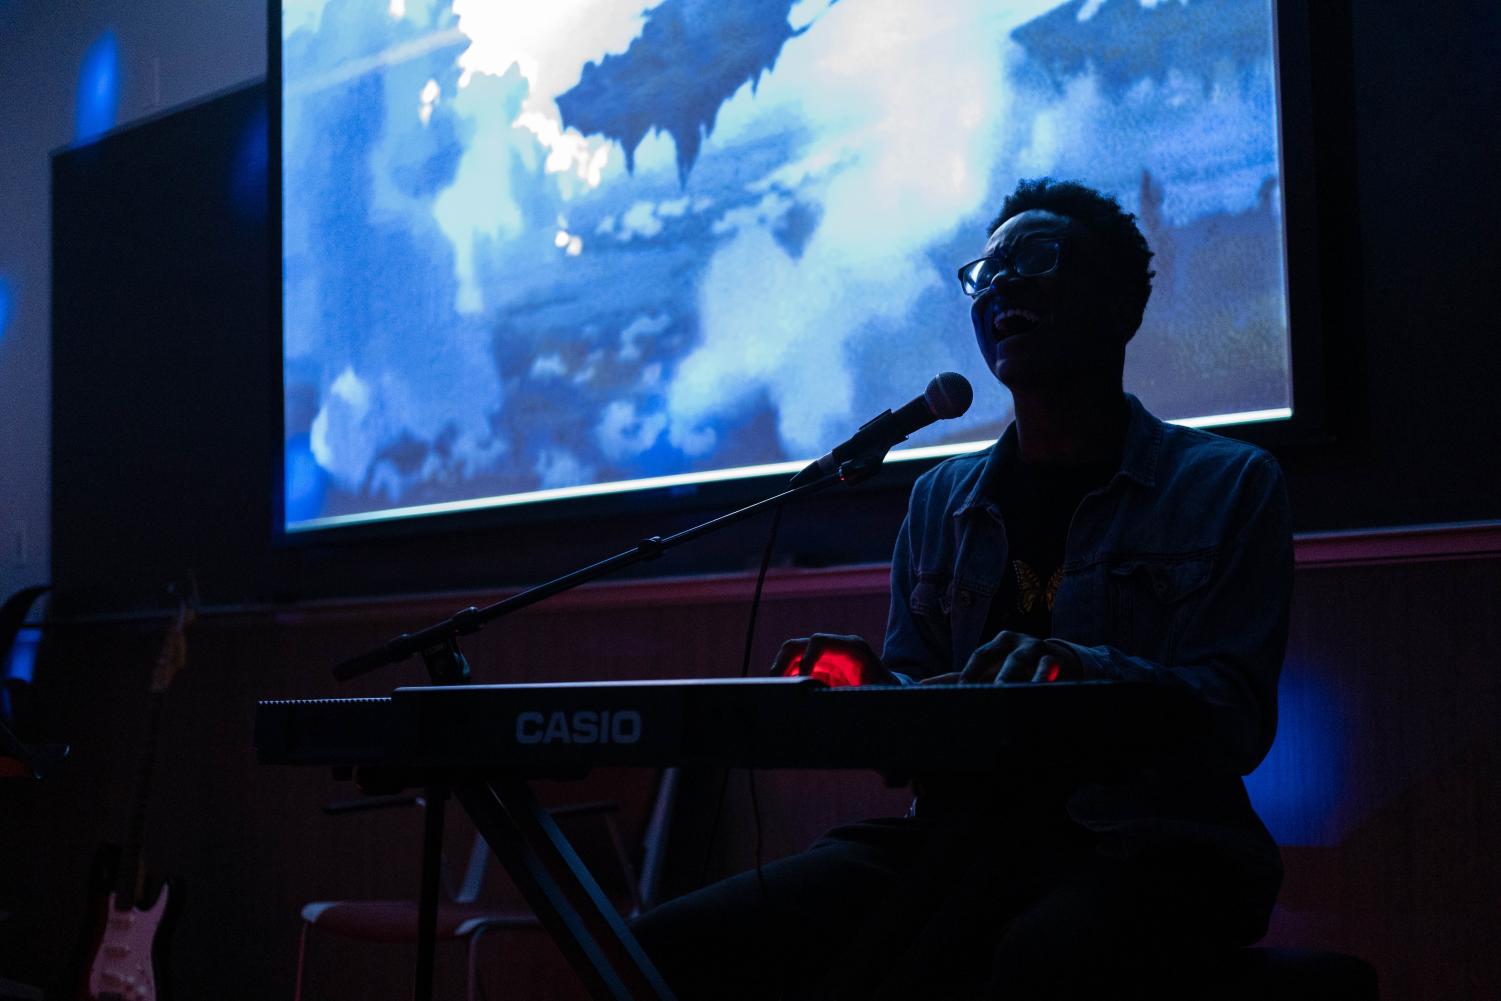  A performer plays a keyboard and sings into a microphone in a dark room with a blue background.